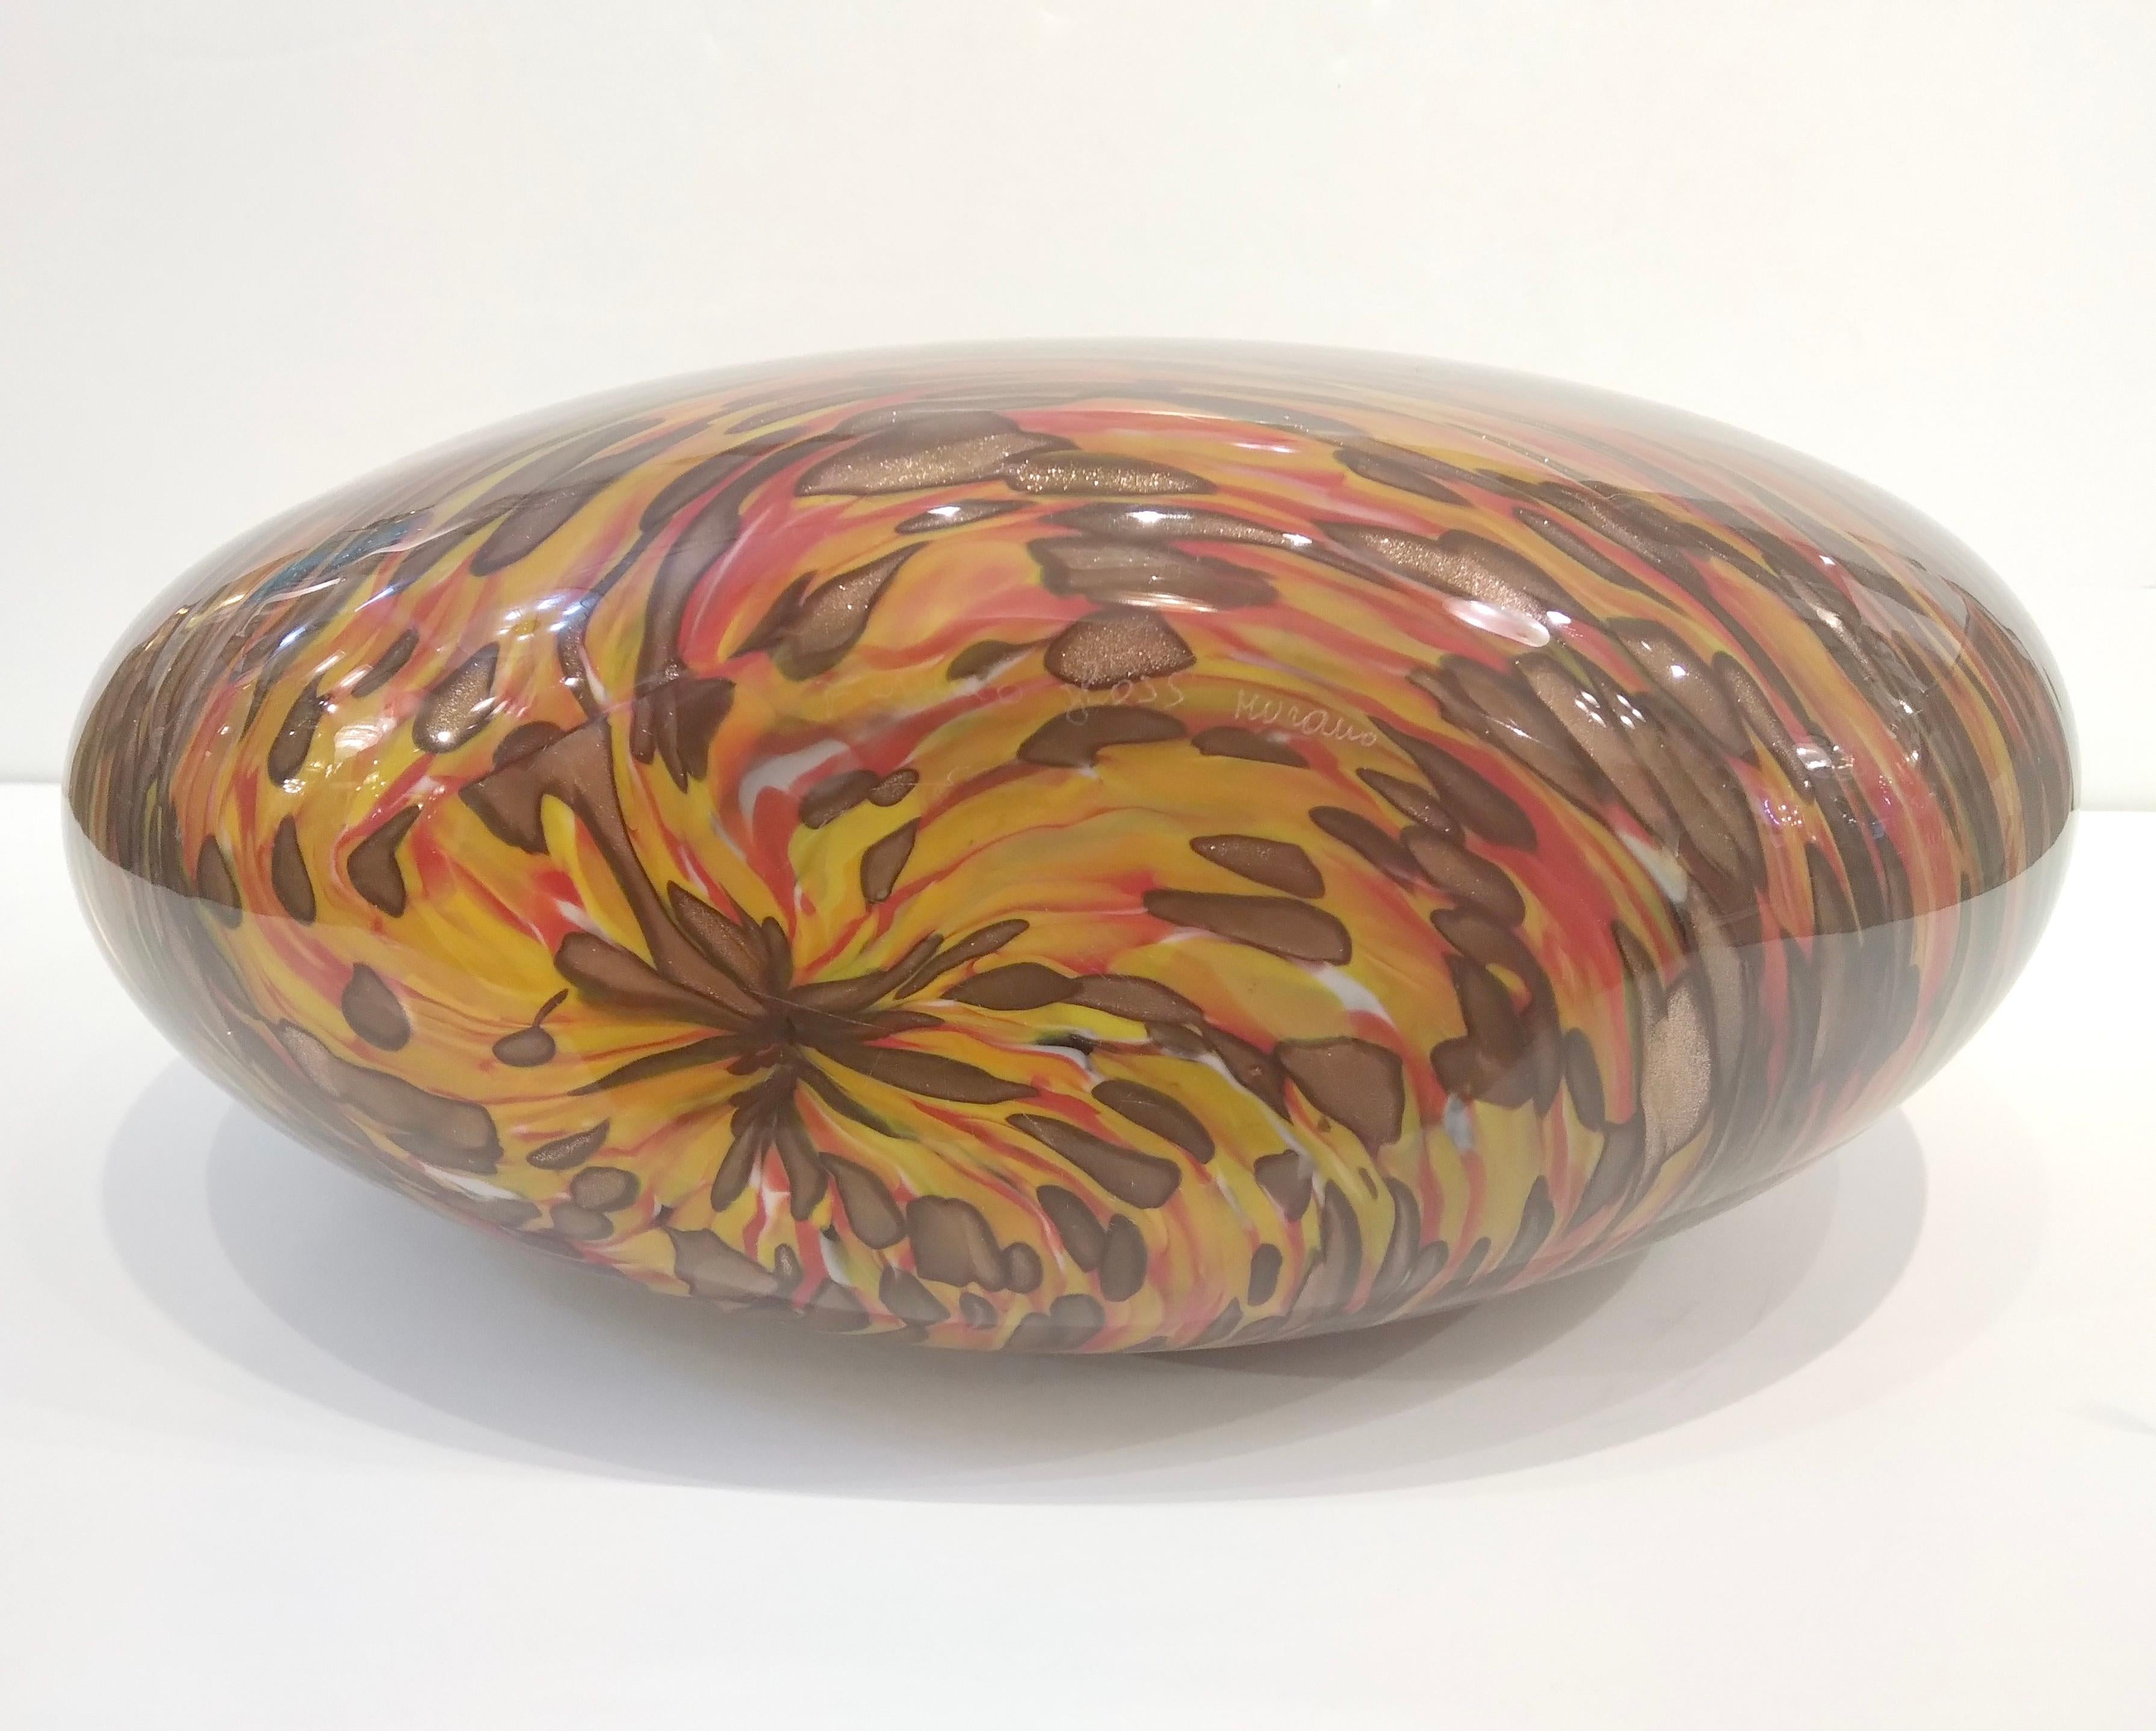 Formia 1980s Modern Elliptical Brown Yellow Red Orange Gold Murano Glass Vase For Sale 5